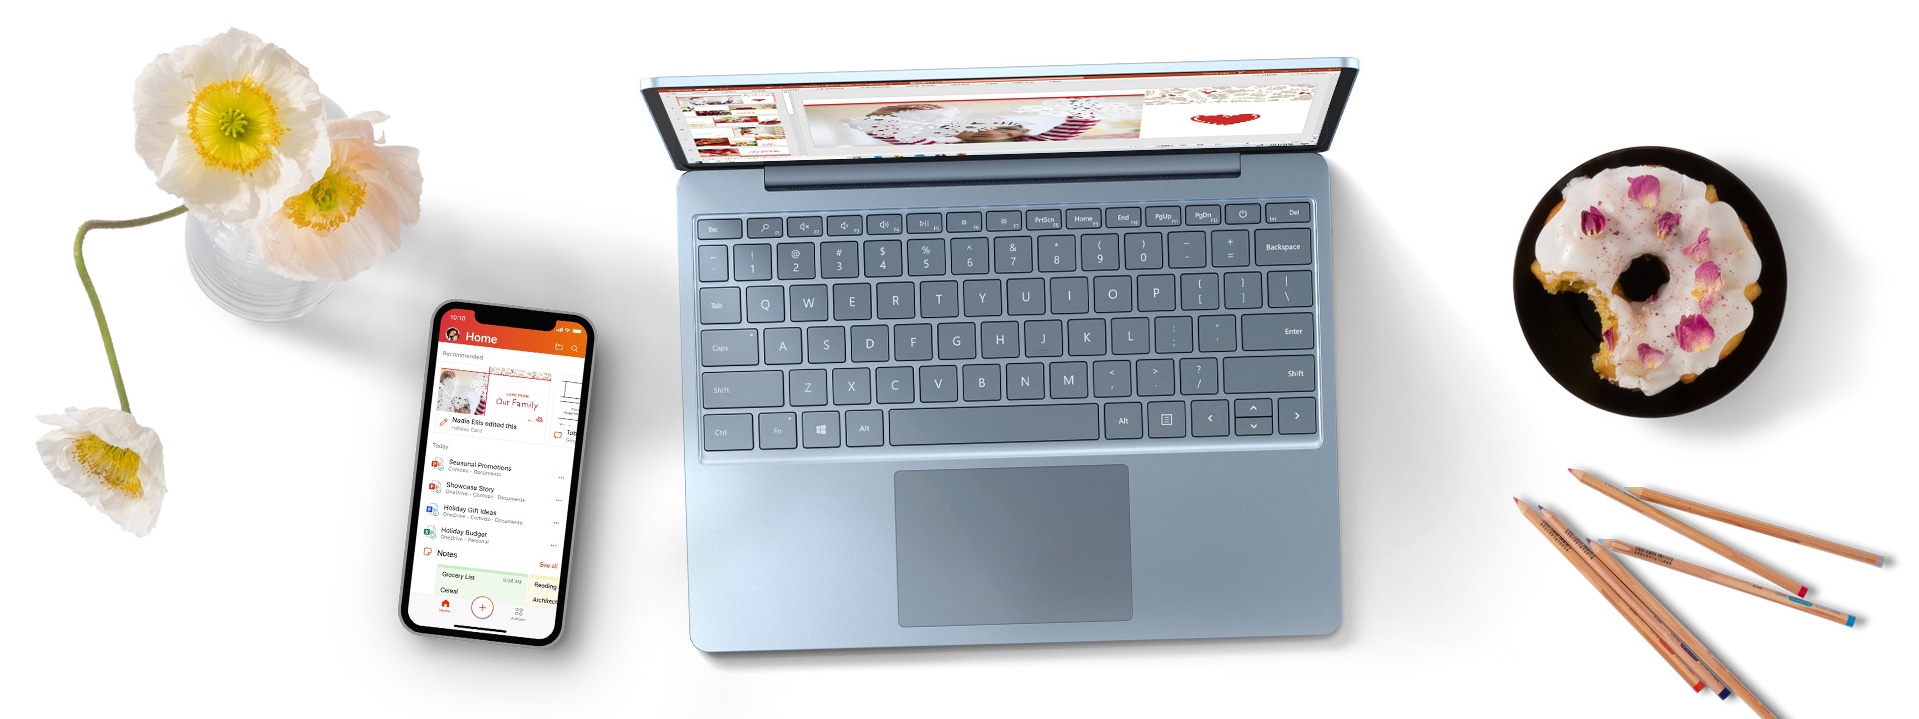 Surface Laptop Go on a desk with a mobile phone, flowers and a doughnut on a plate